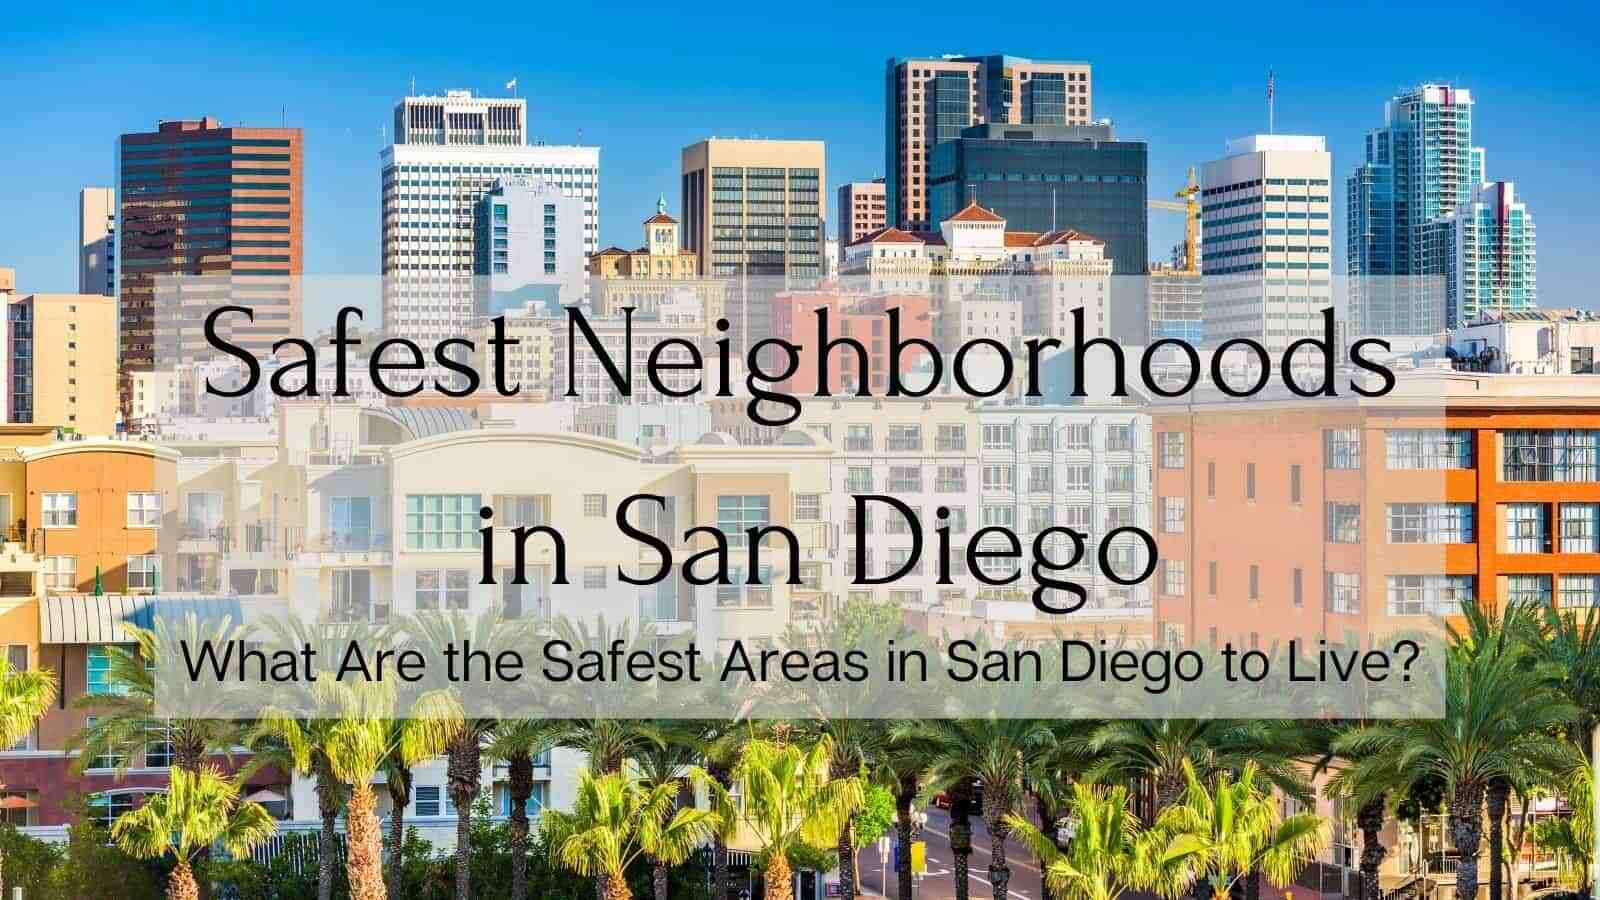 Is crime bad in San Diego?